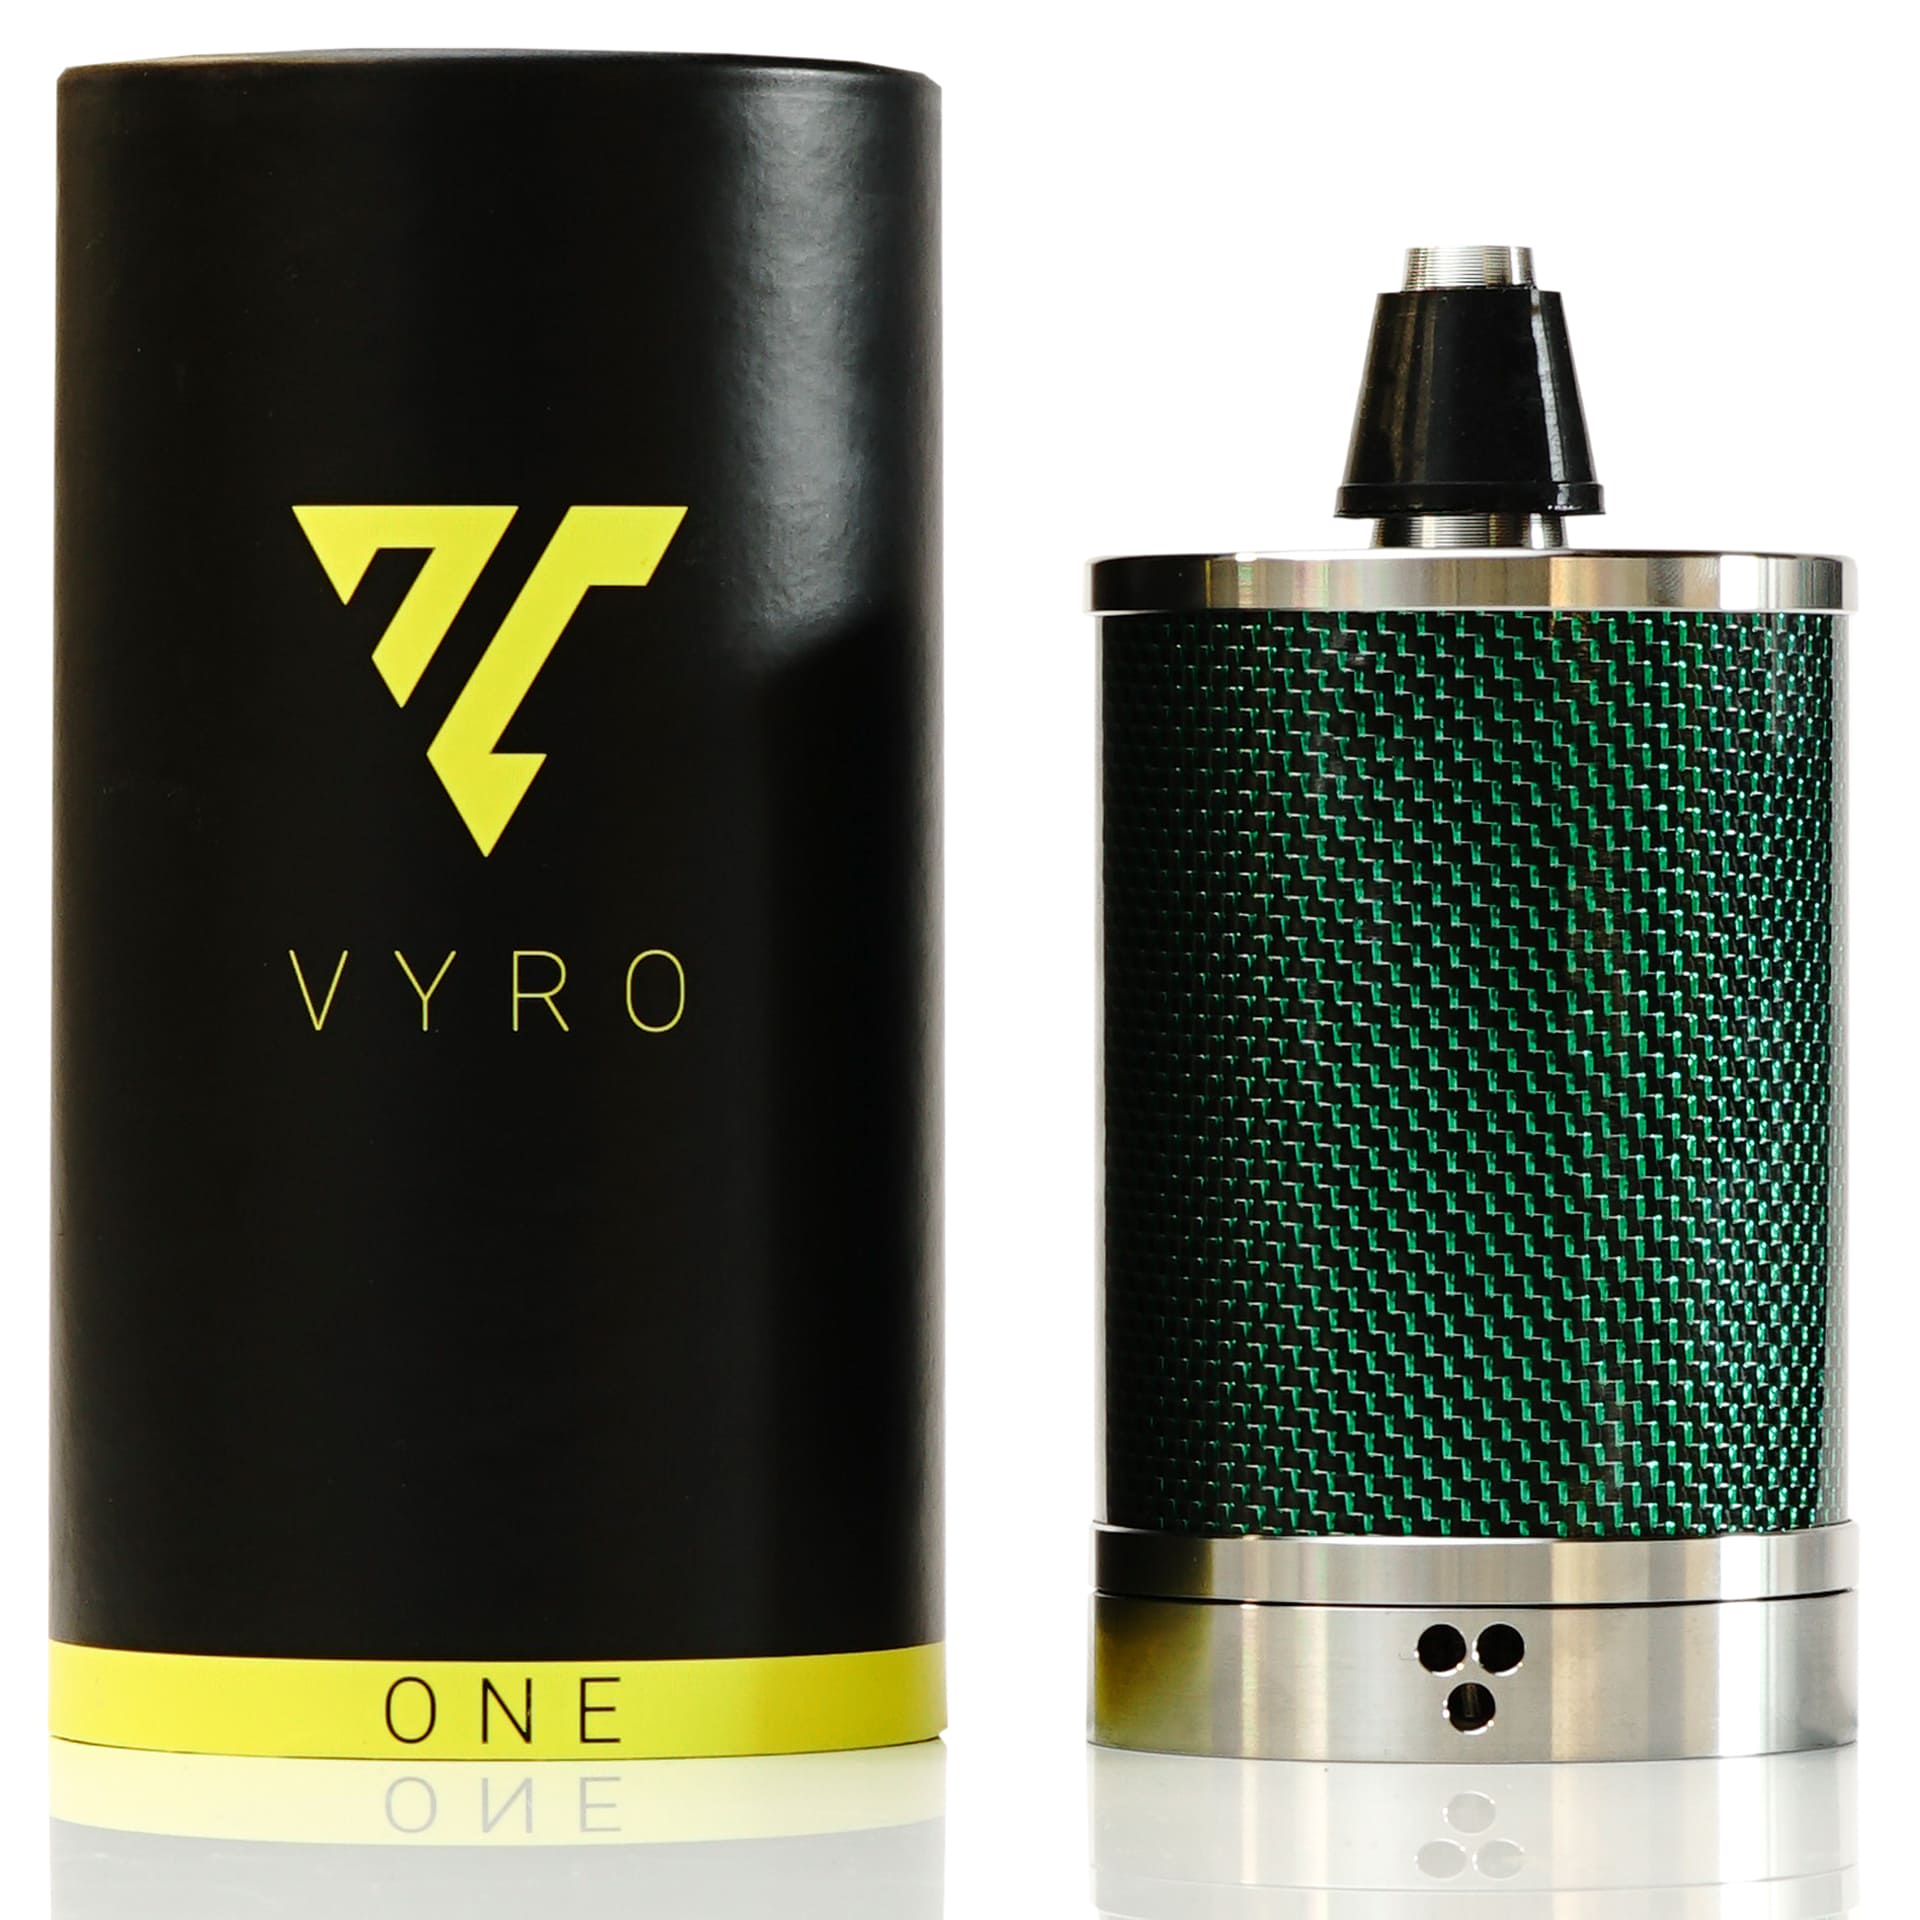 Vyro / One / Carbo Green